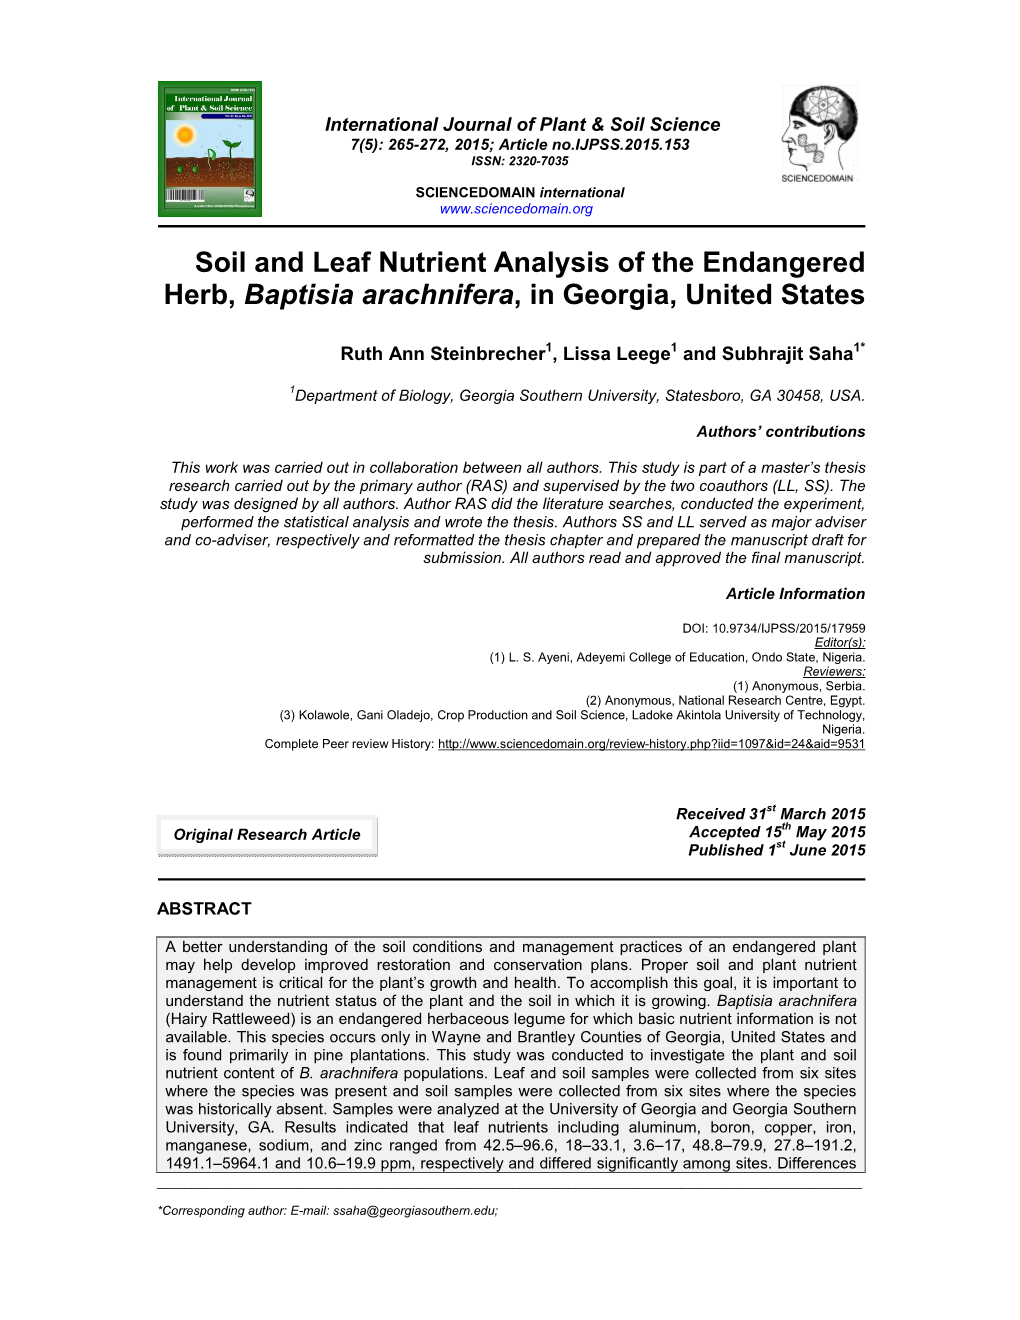 Soil and Leaf Nutrient Analysis of the Endangered Herb, Baptisia Arachnifera, in Georgia, United States